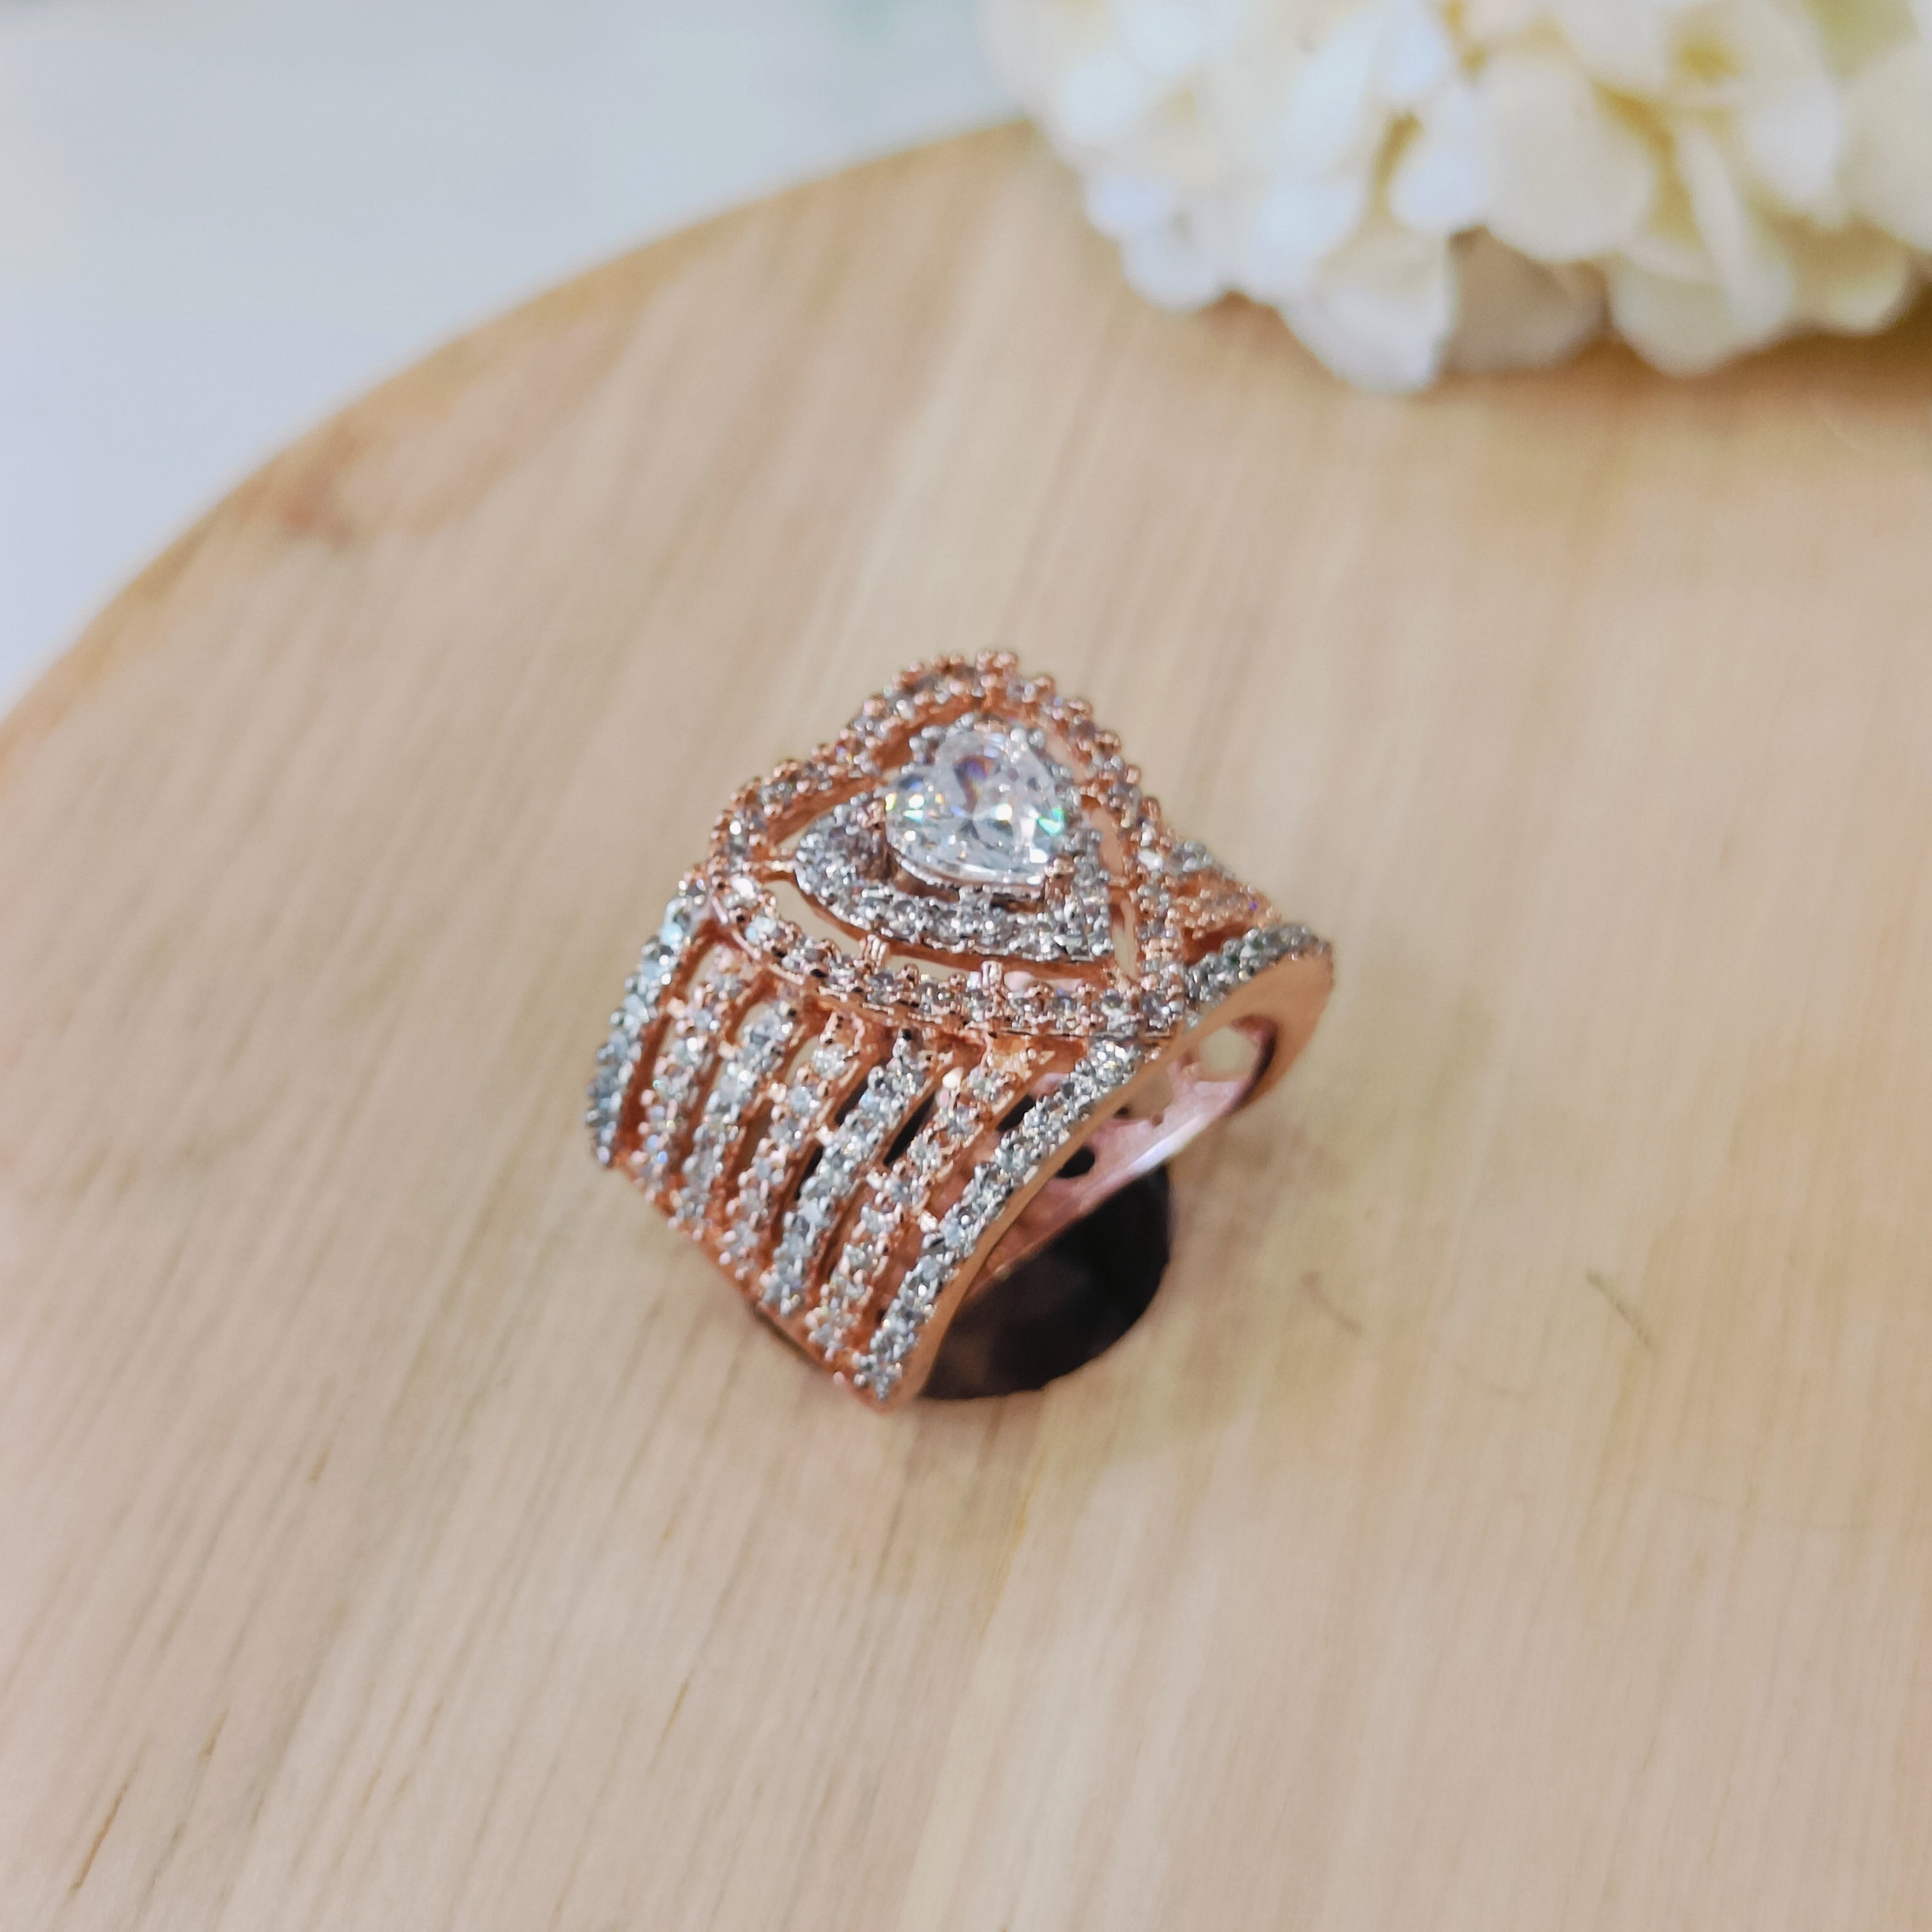 Vs sterling silver cocktail ring 166